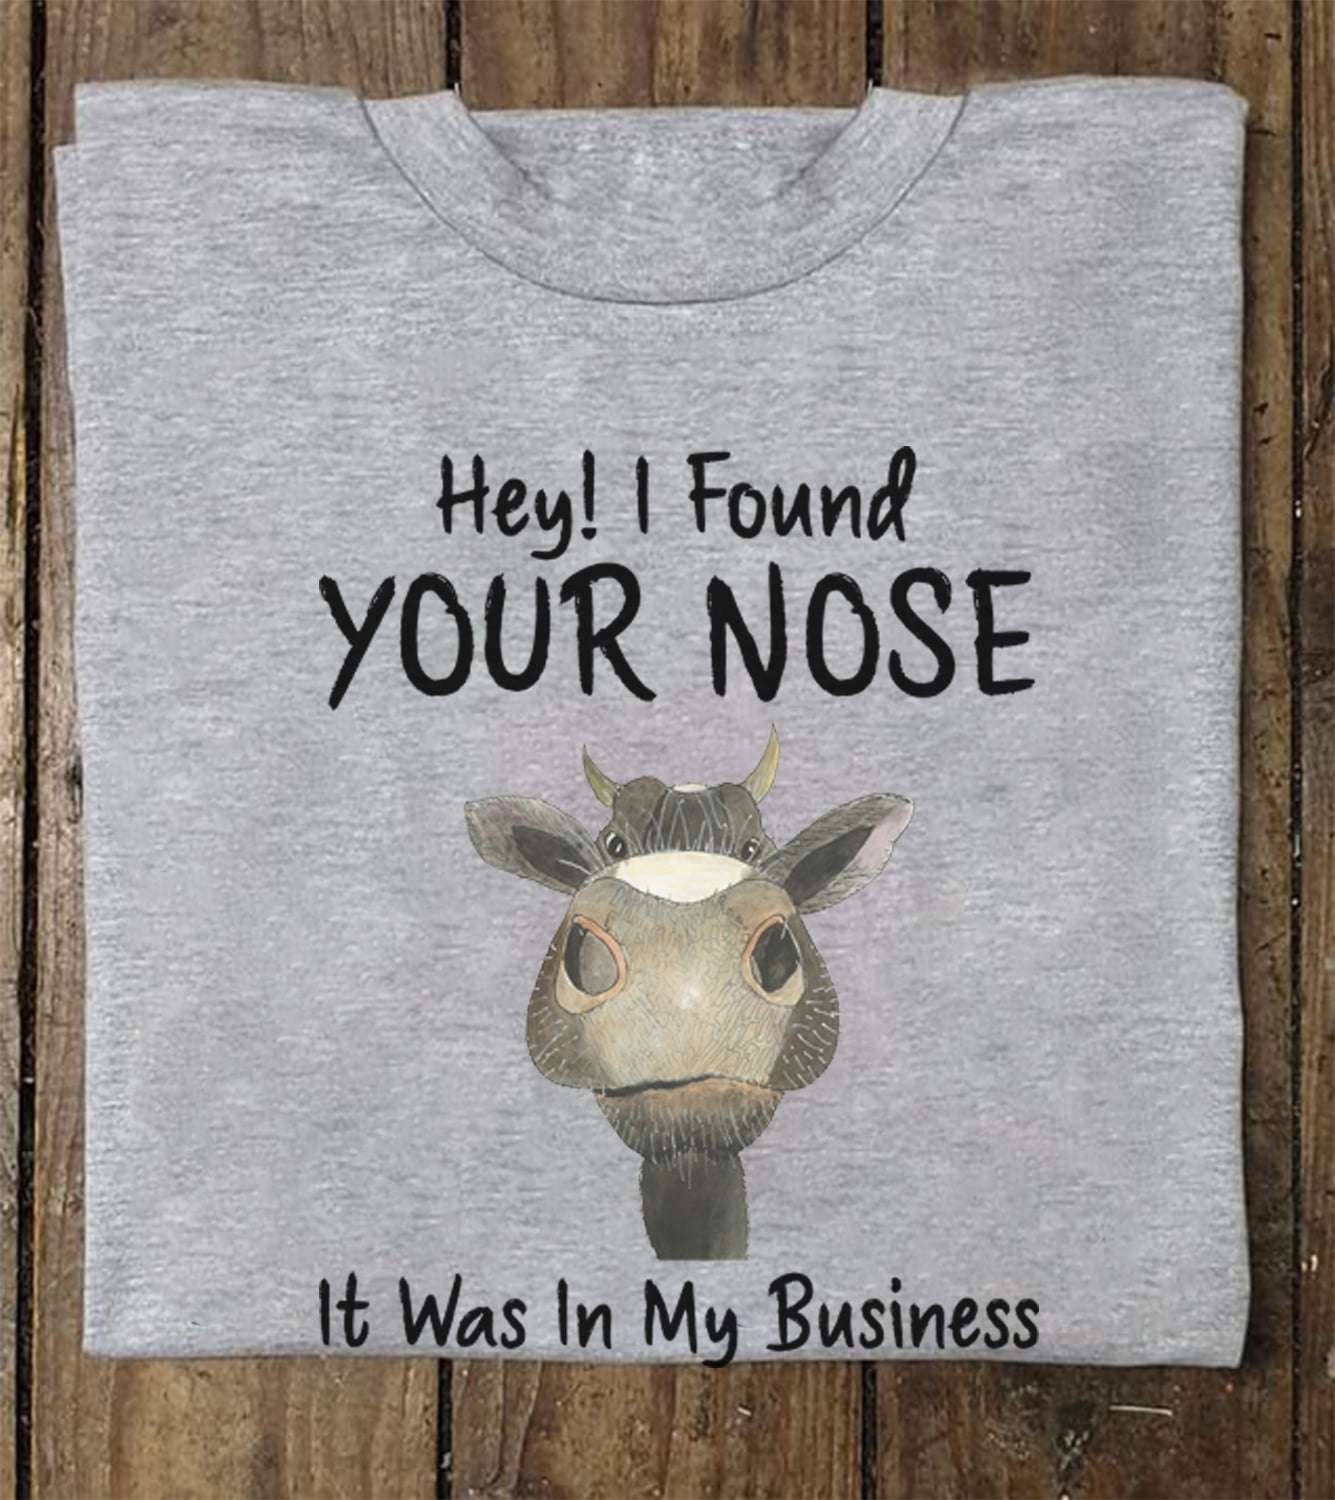 Hey I found your nose it was in my business - Cow big nose